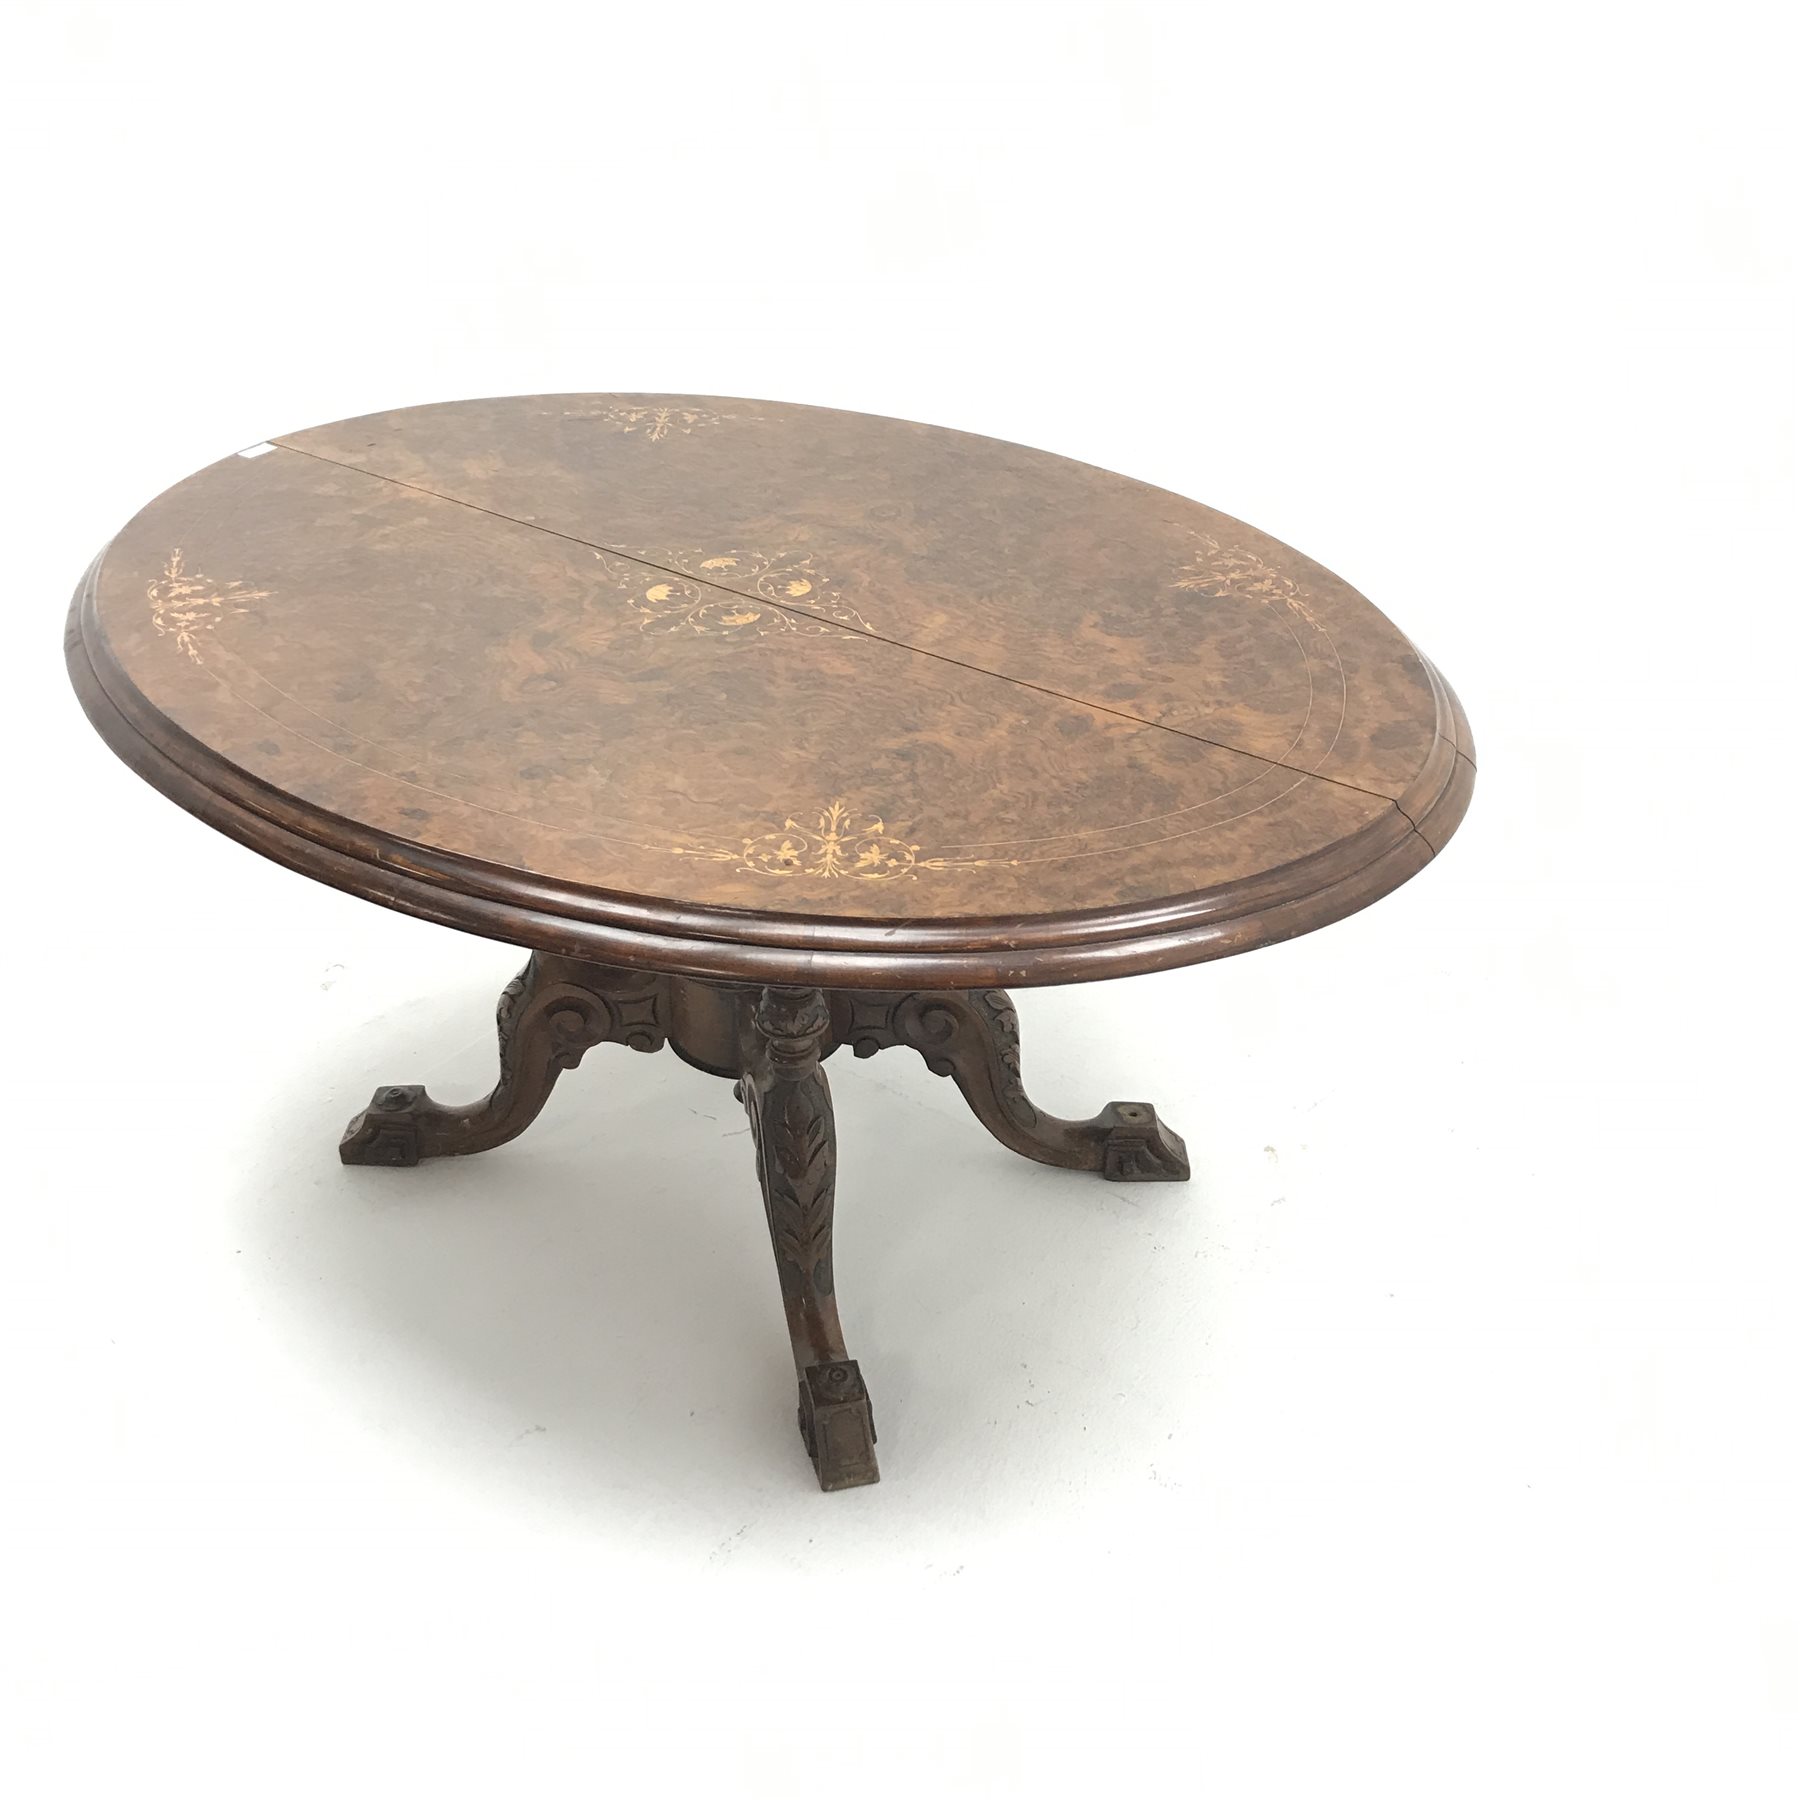 Victorian inlaid oval tilt top table, quadruple turned support with central finial on four acanthus - Image 3 of 6